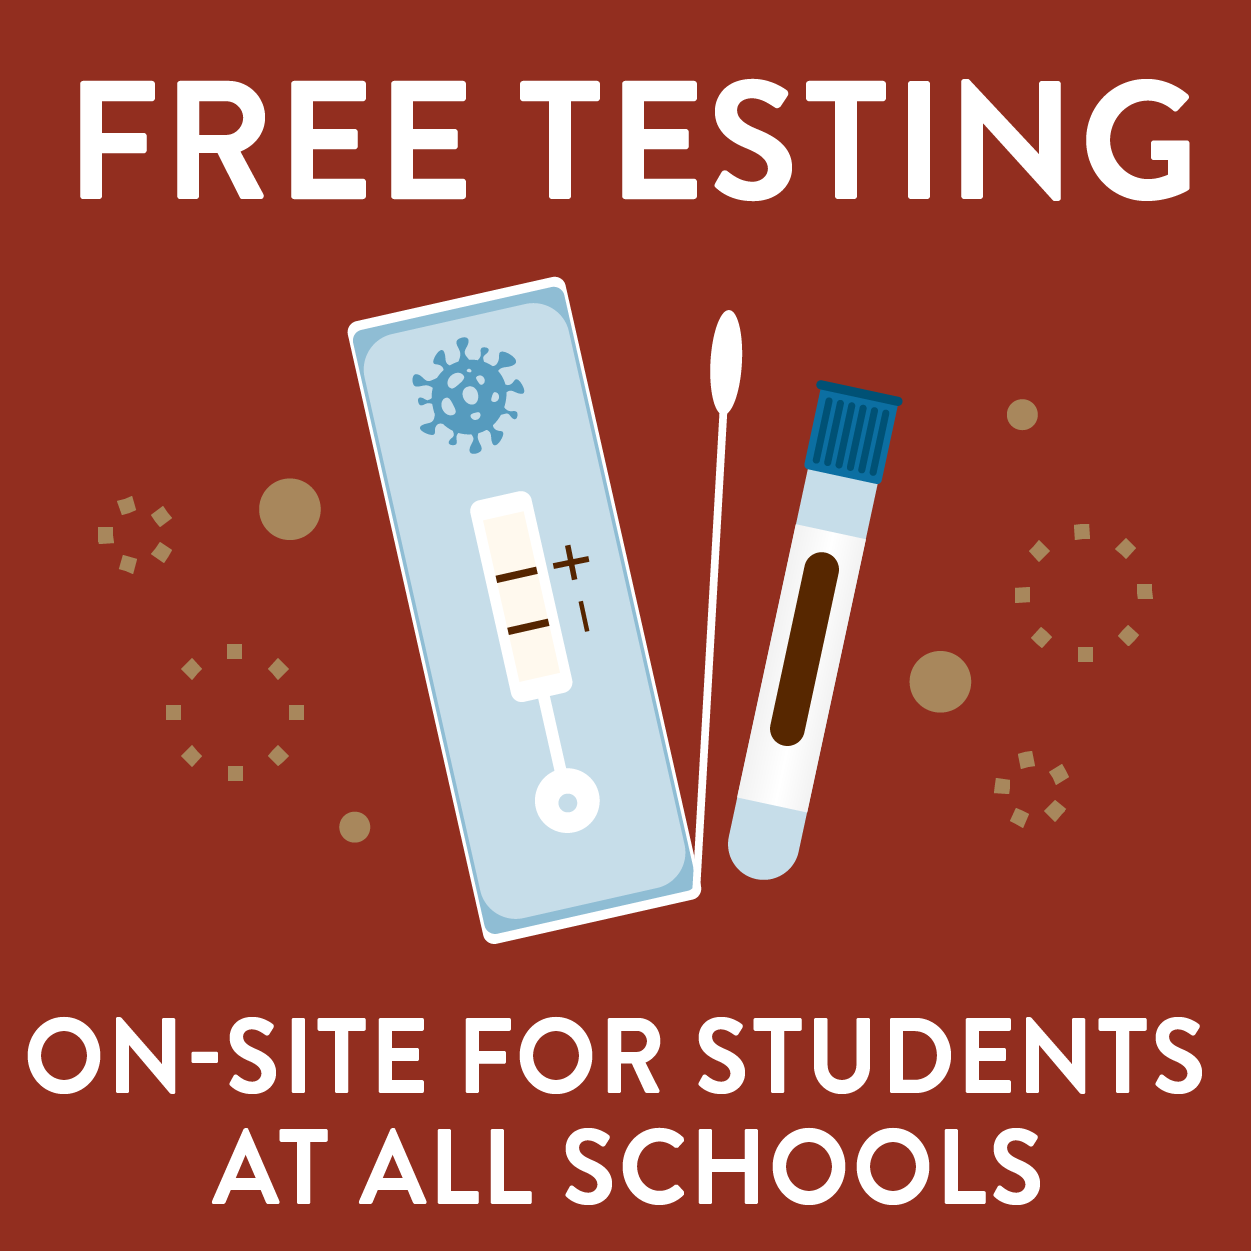 Free testing on-site for students at all schools